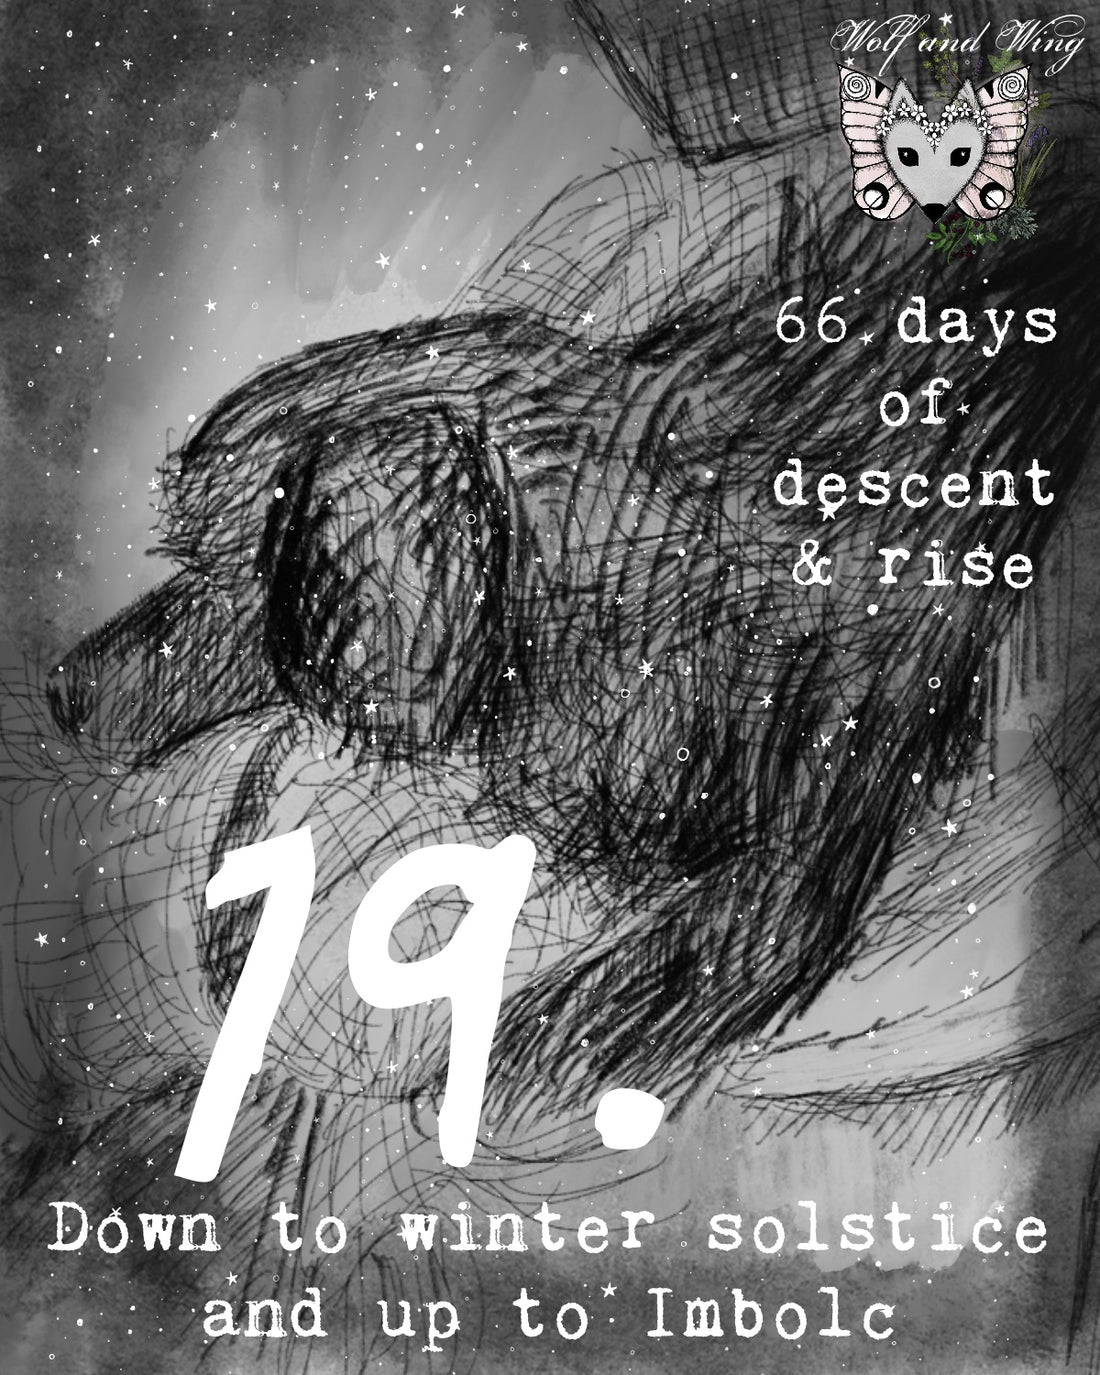 Day 19. Advent Descent. Comfort yourself without food